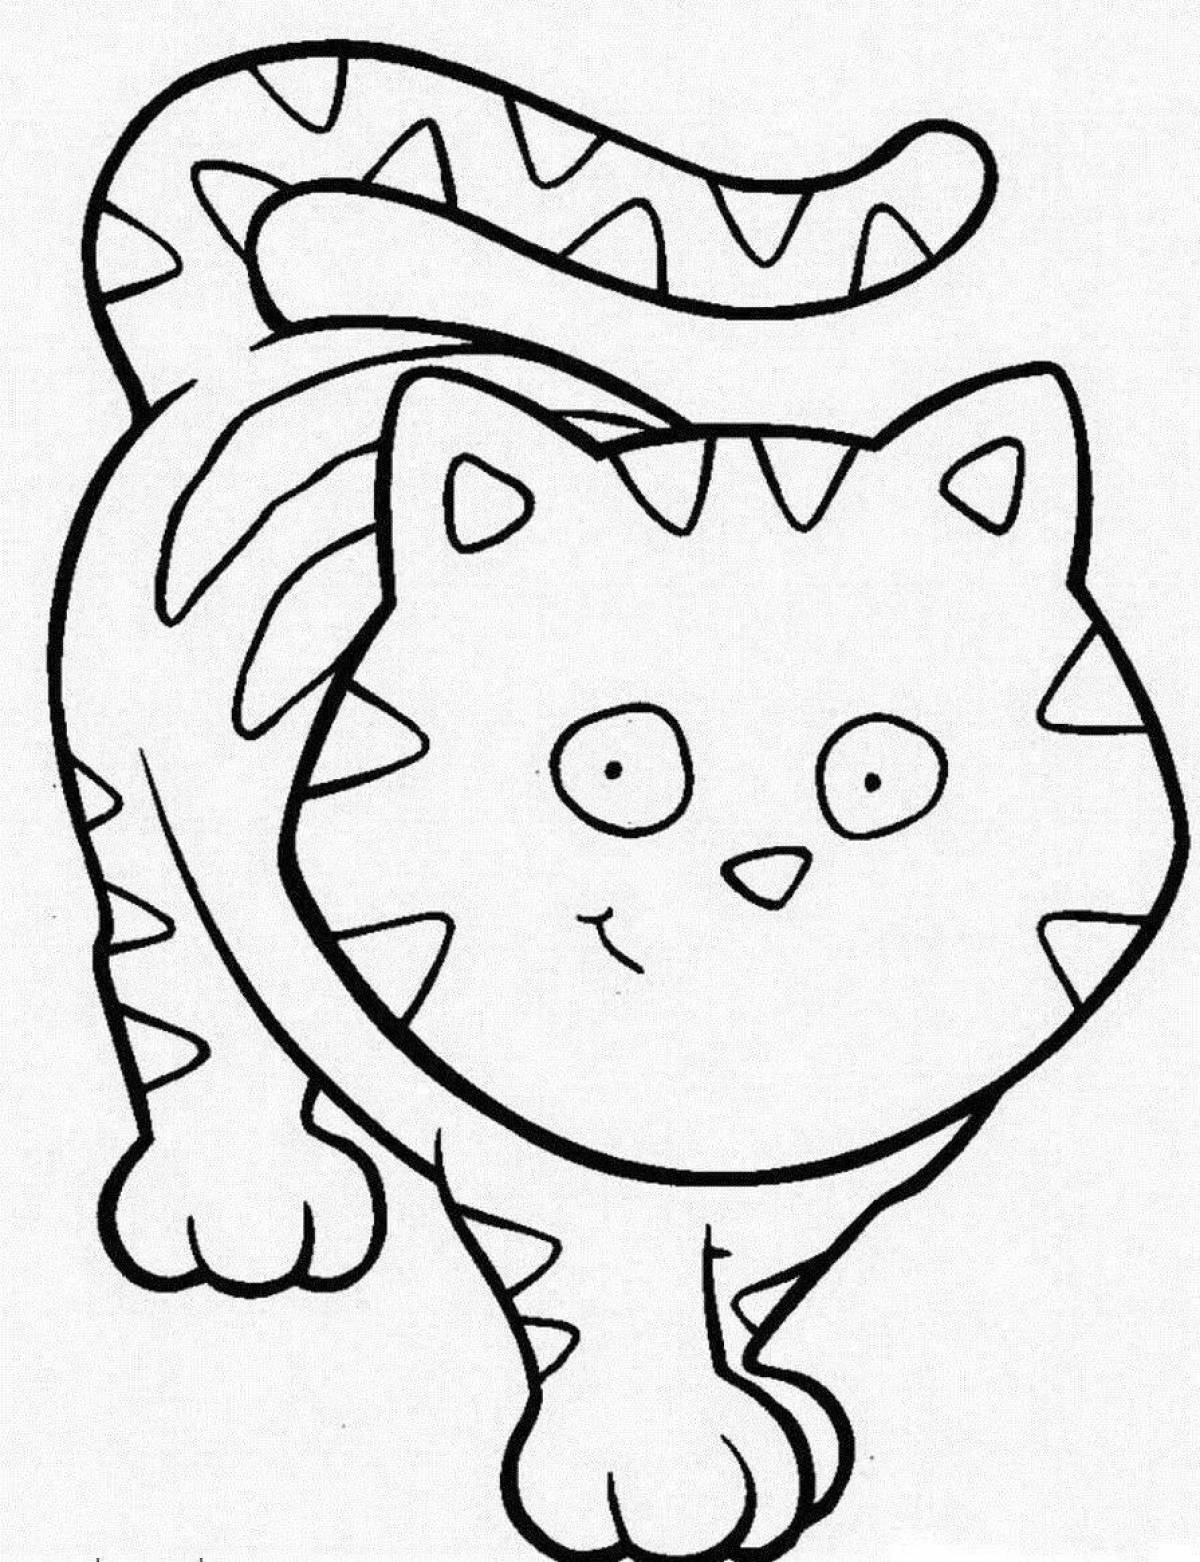 Coloring page graceful big cat